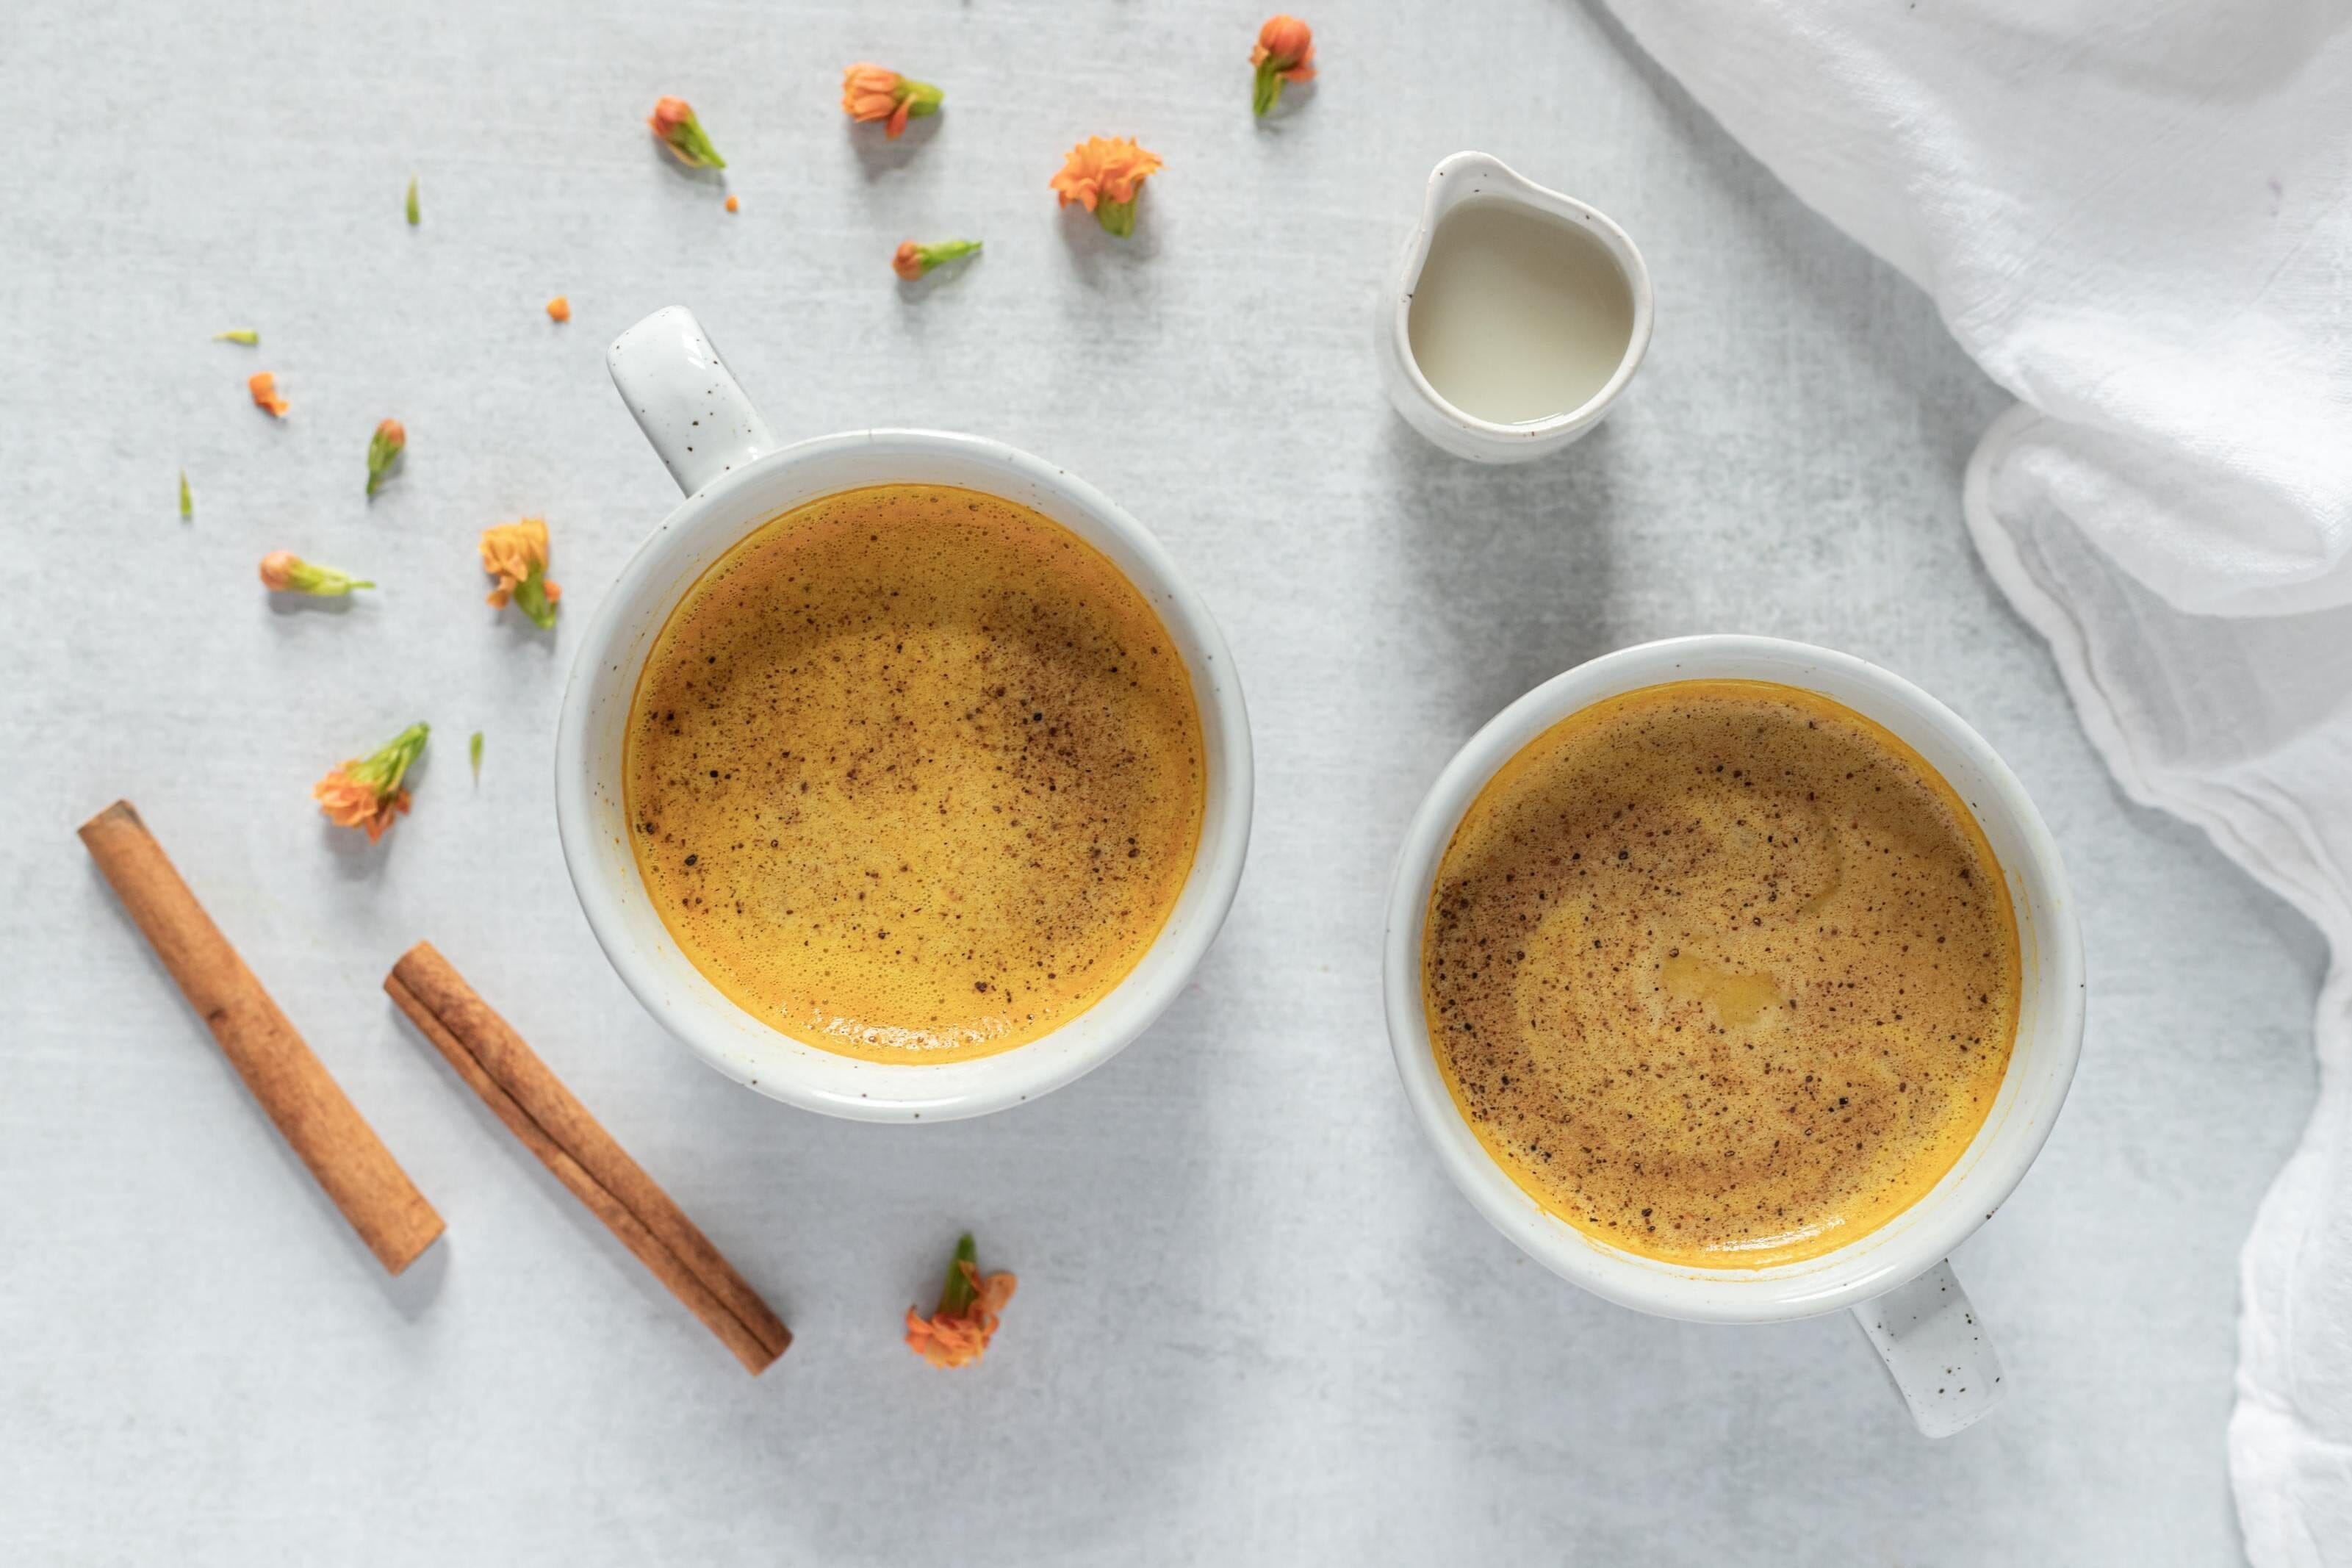 Golden Milk: What is it and What are its Benefits?